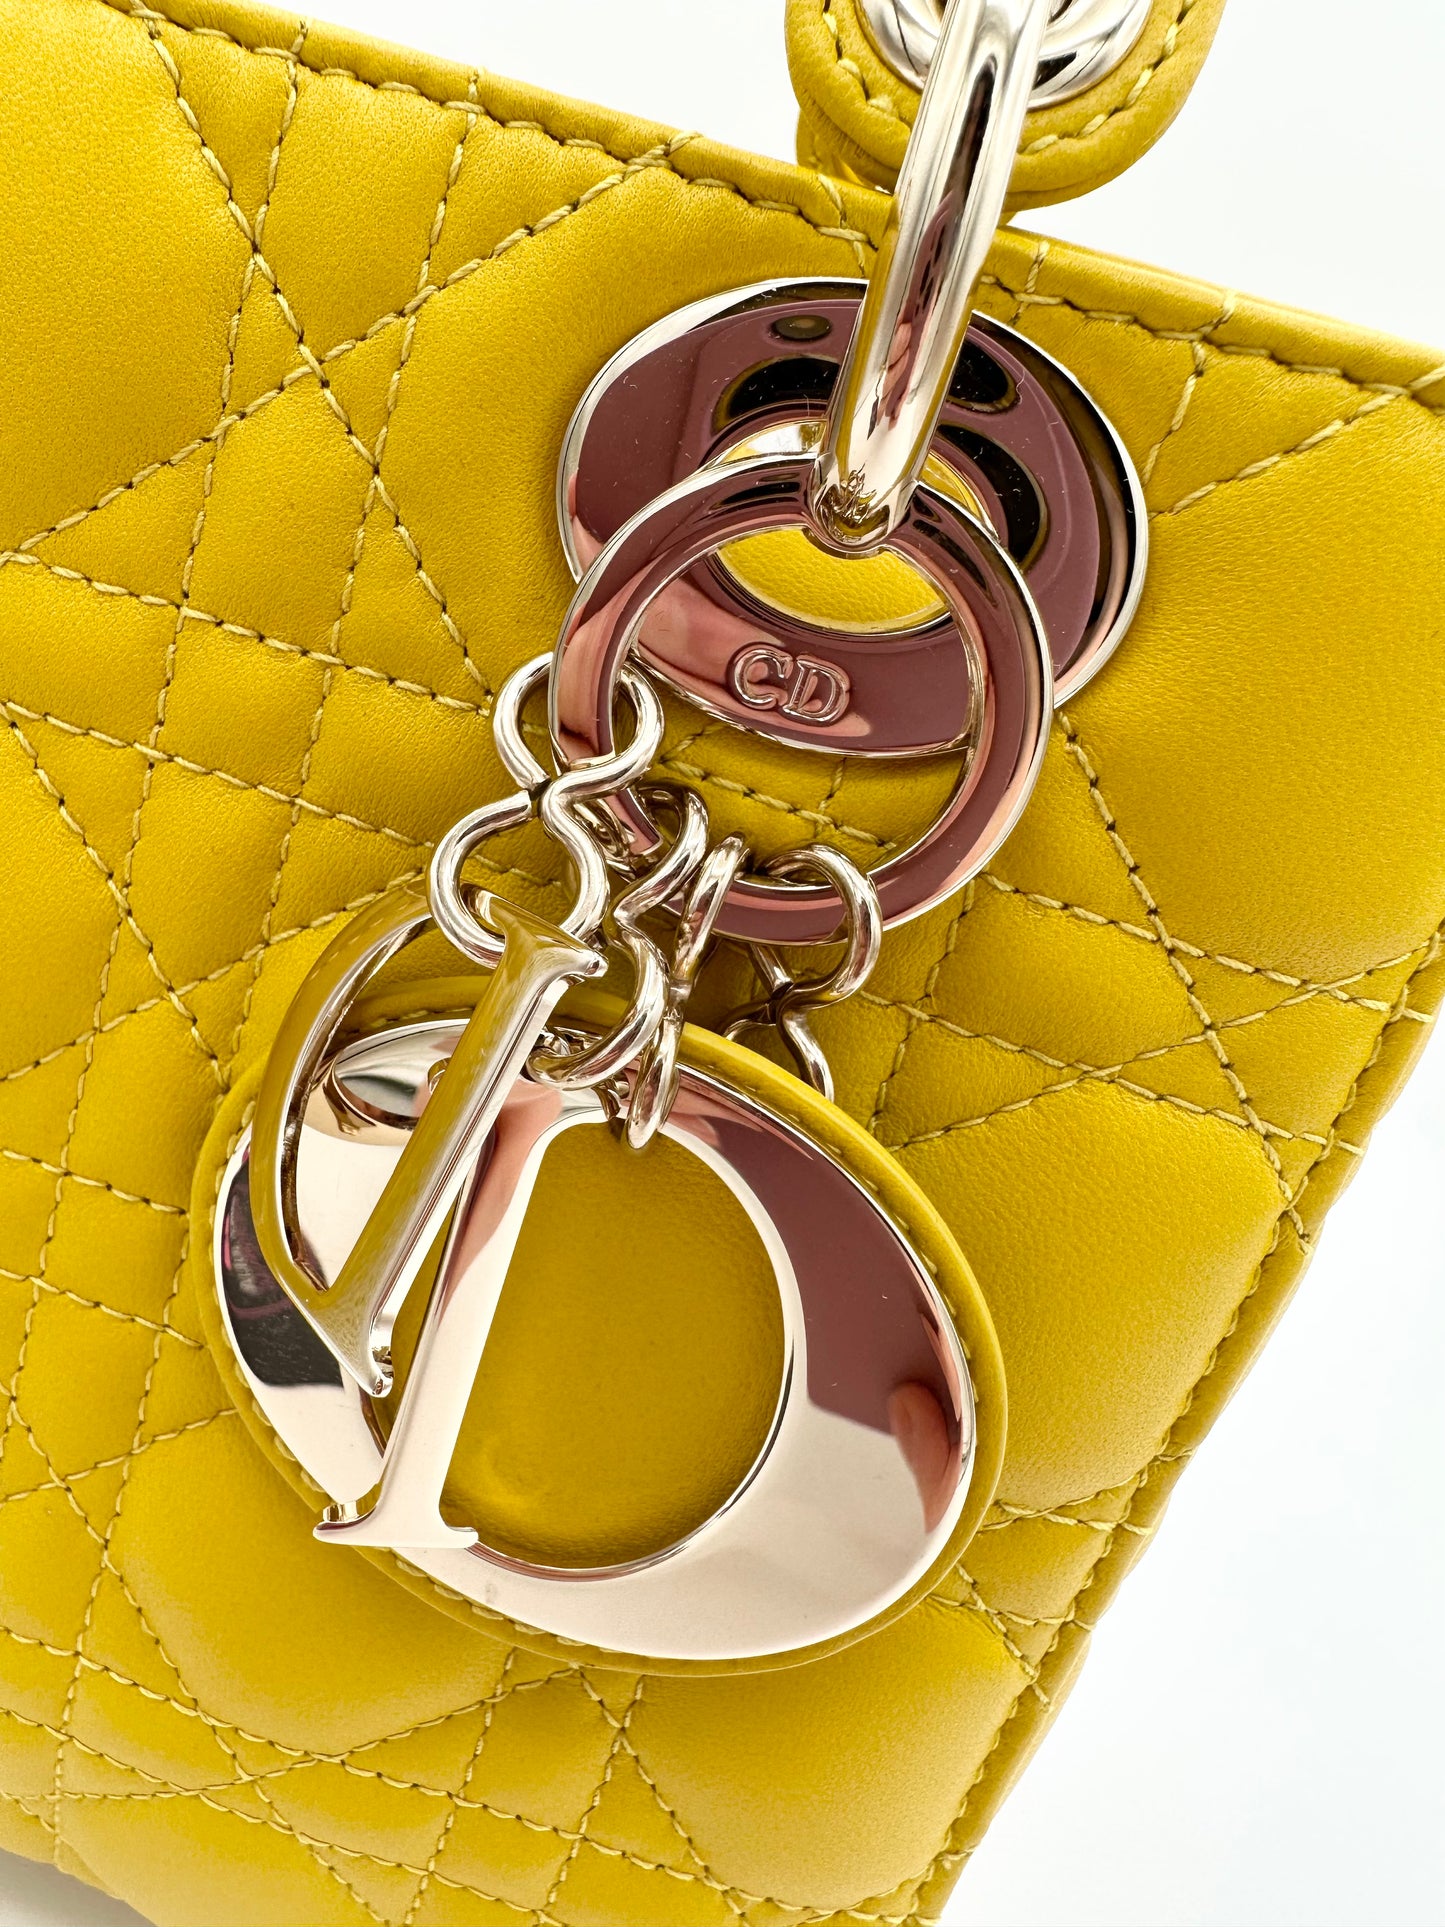 Christian Dior Lady Dior Small Yellow Cannage Lambskin